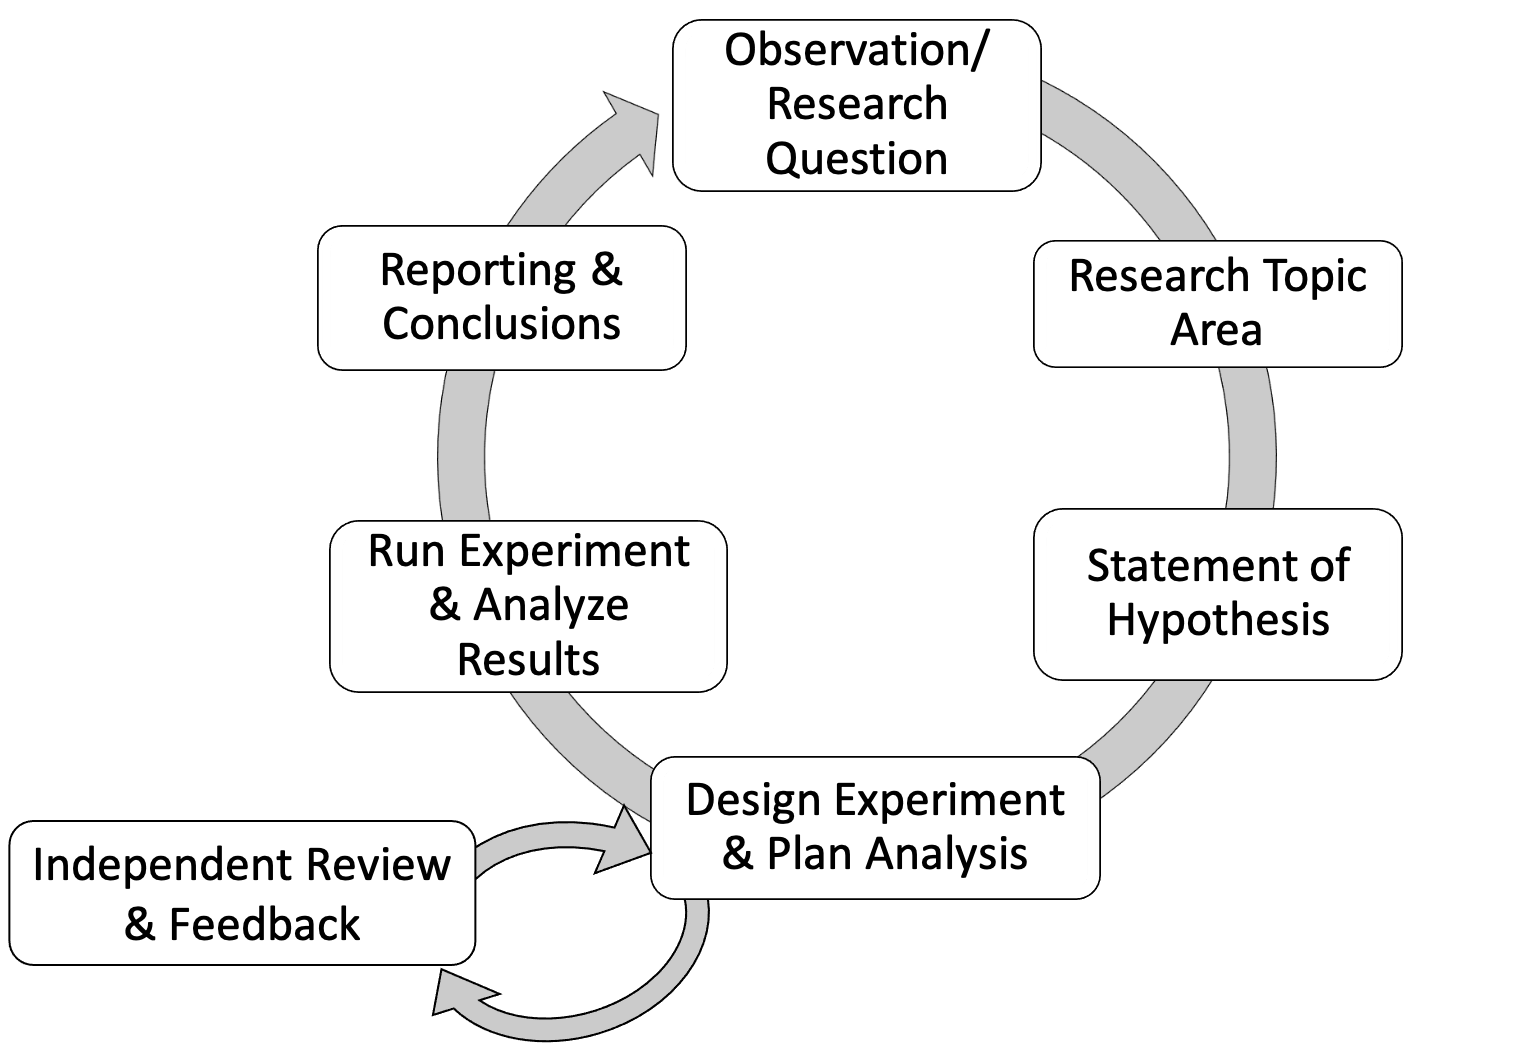 Figure 4. Visual representation of the steps of the Scientific Method. Image by Robin Young, licensed under CC BY 4.0